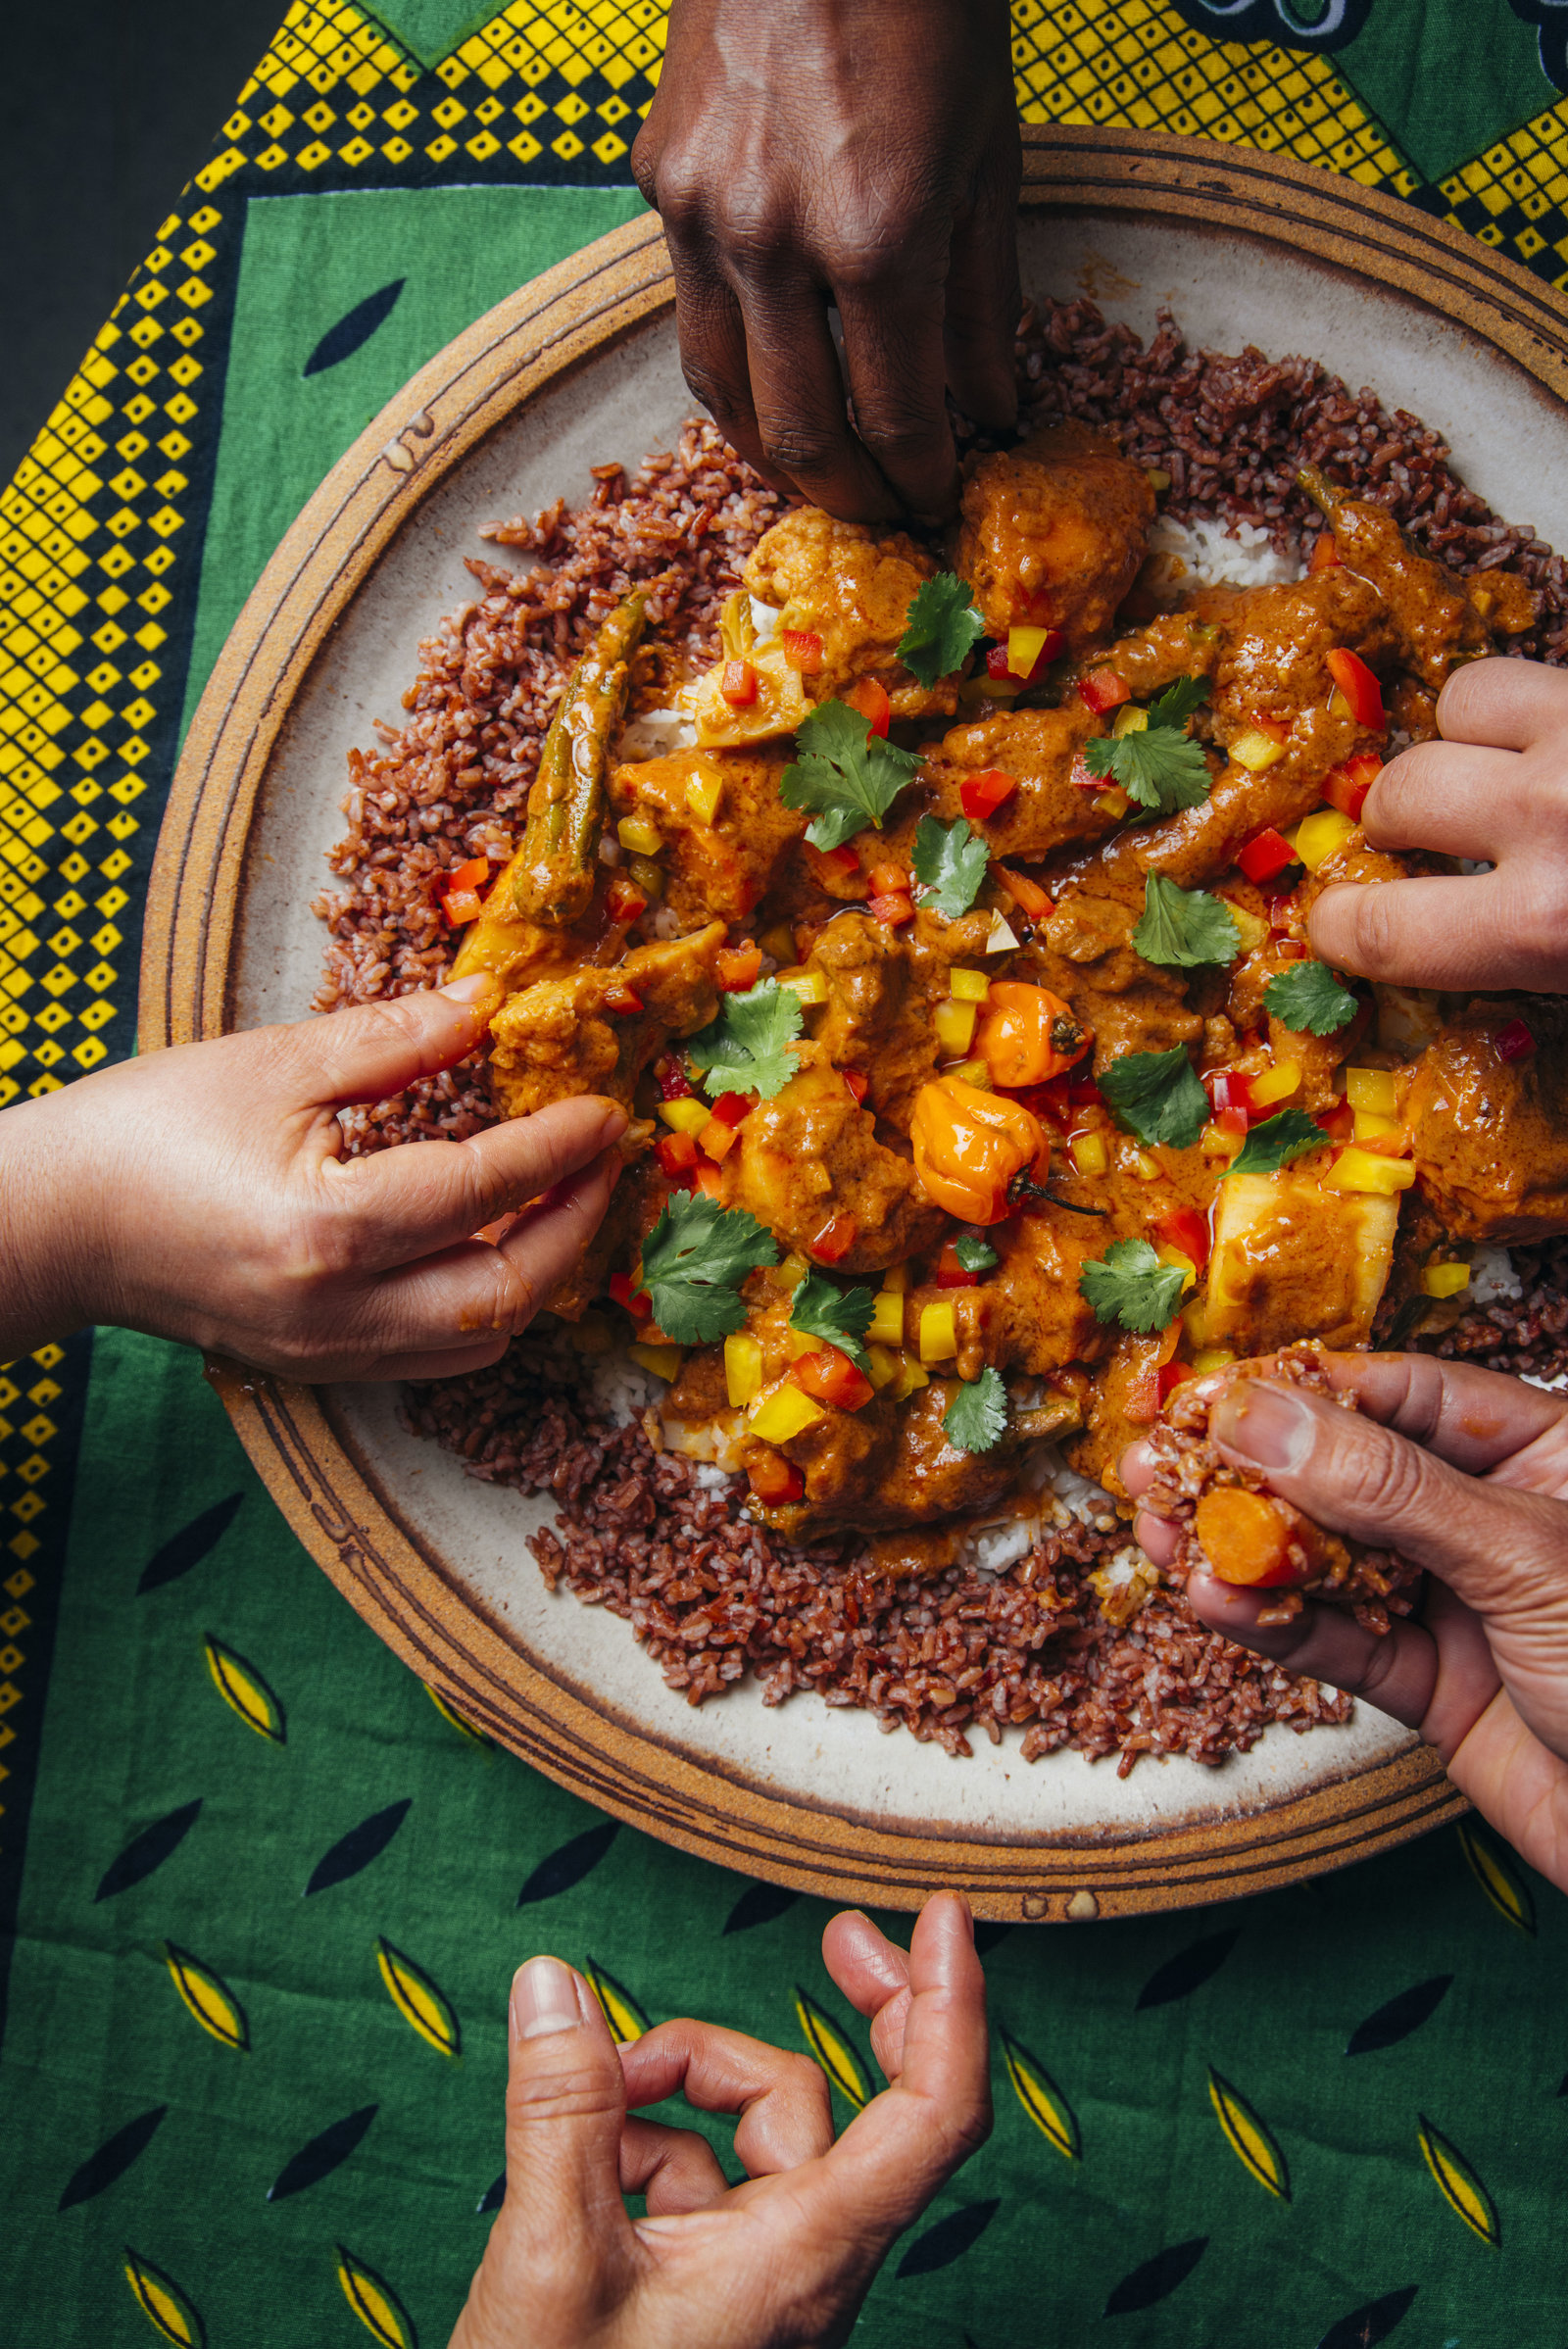 Mafé is a peanut stew that Nafy Flatley started cooking when she was 8 in Senegal. She is the owner of Teranga, a beverage company she founded with help from La Cocina.